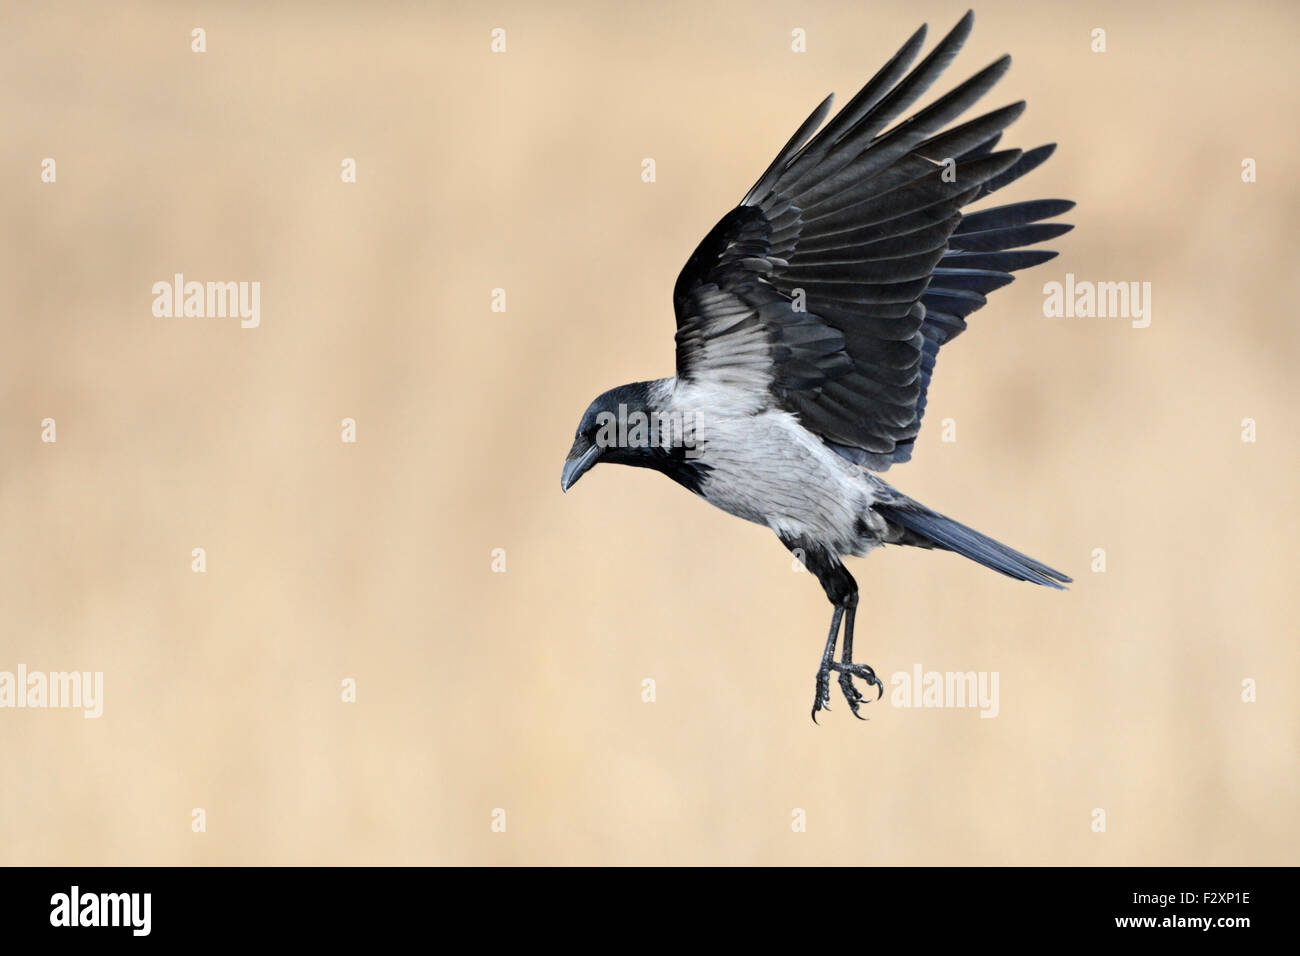 Hoodiecrow / Nebelkrähe ( Corvus cornix ) in flight with wide open wings in front of a beautiful clean reed-colored background. Stock Photo